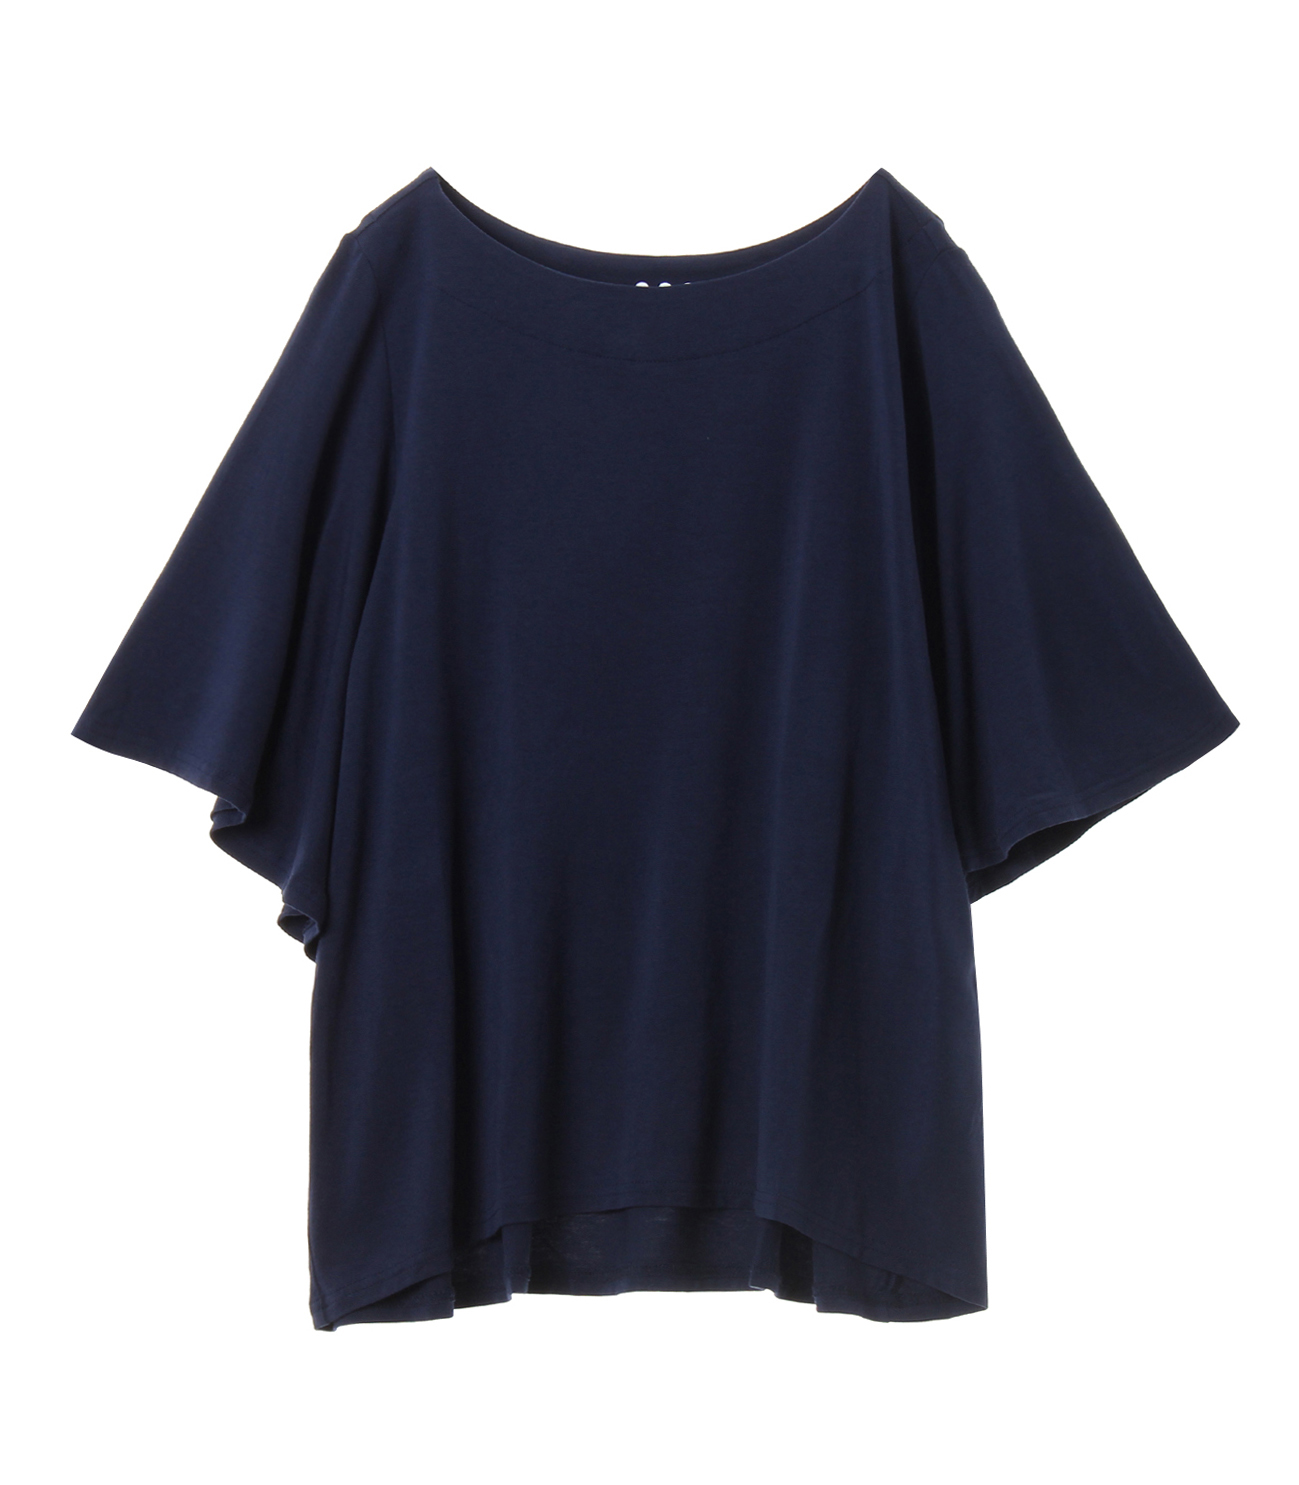 Clear jersey top 詳細画像 navy 2